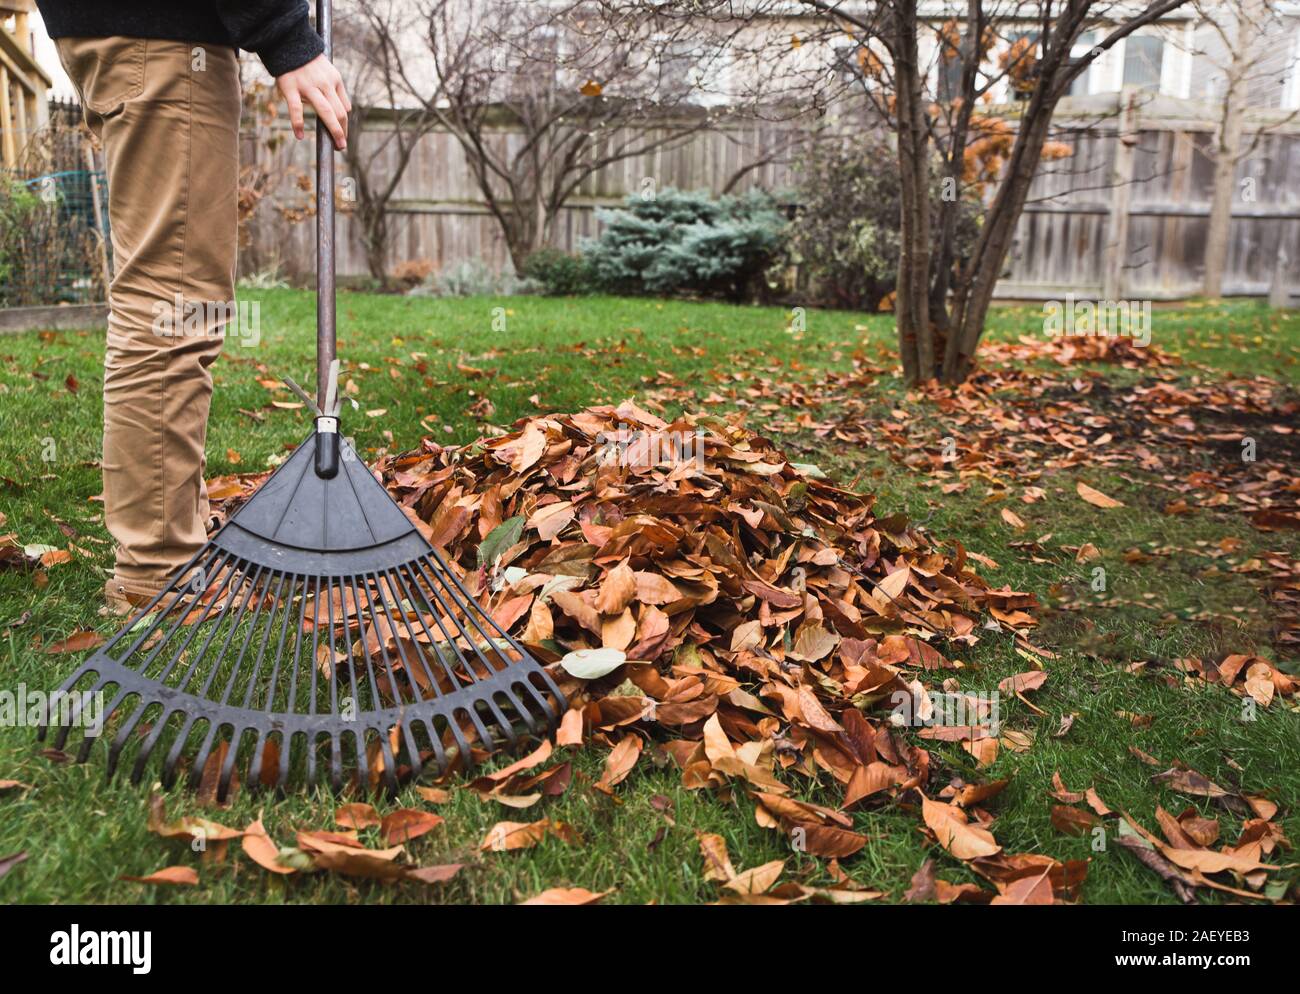 Cropped image of boy raking leaves in a backyard on a fall day. Stock Photo